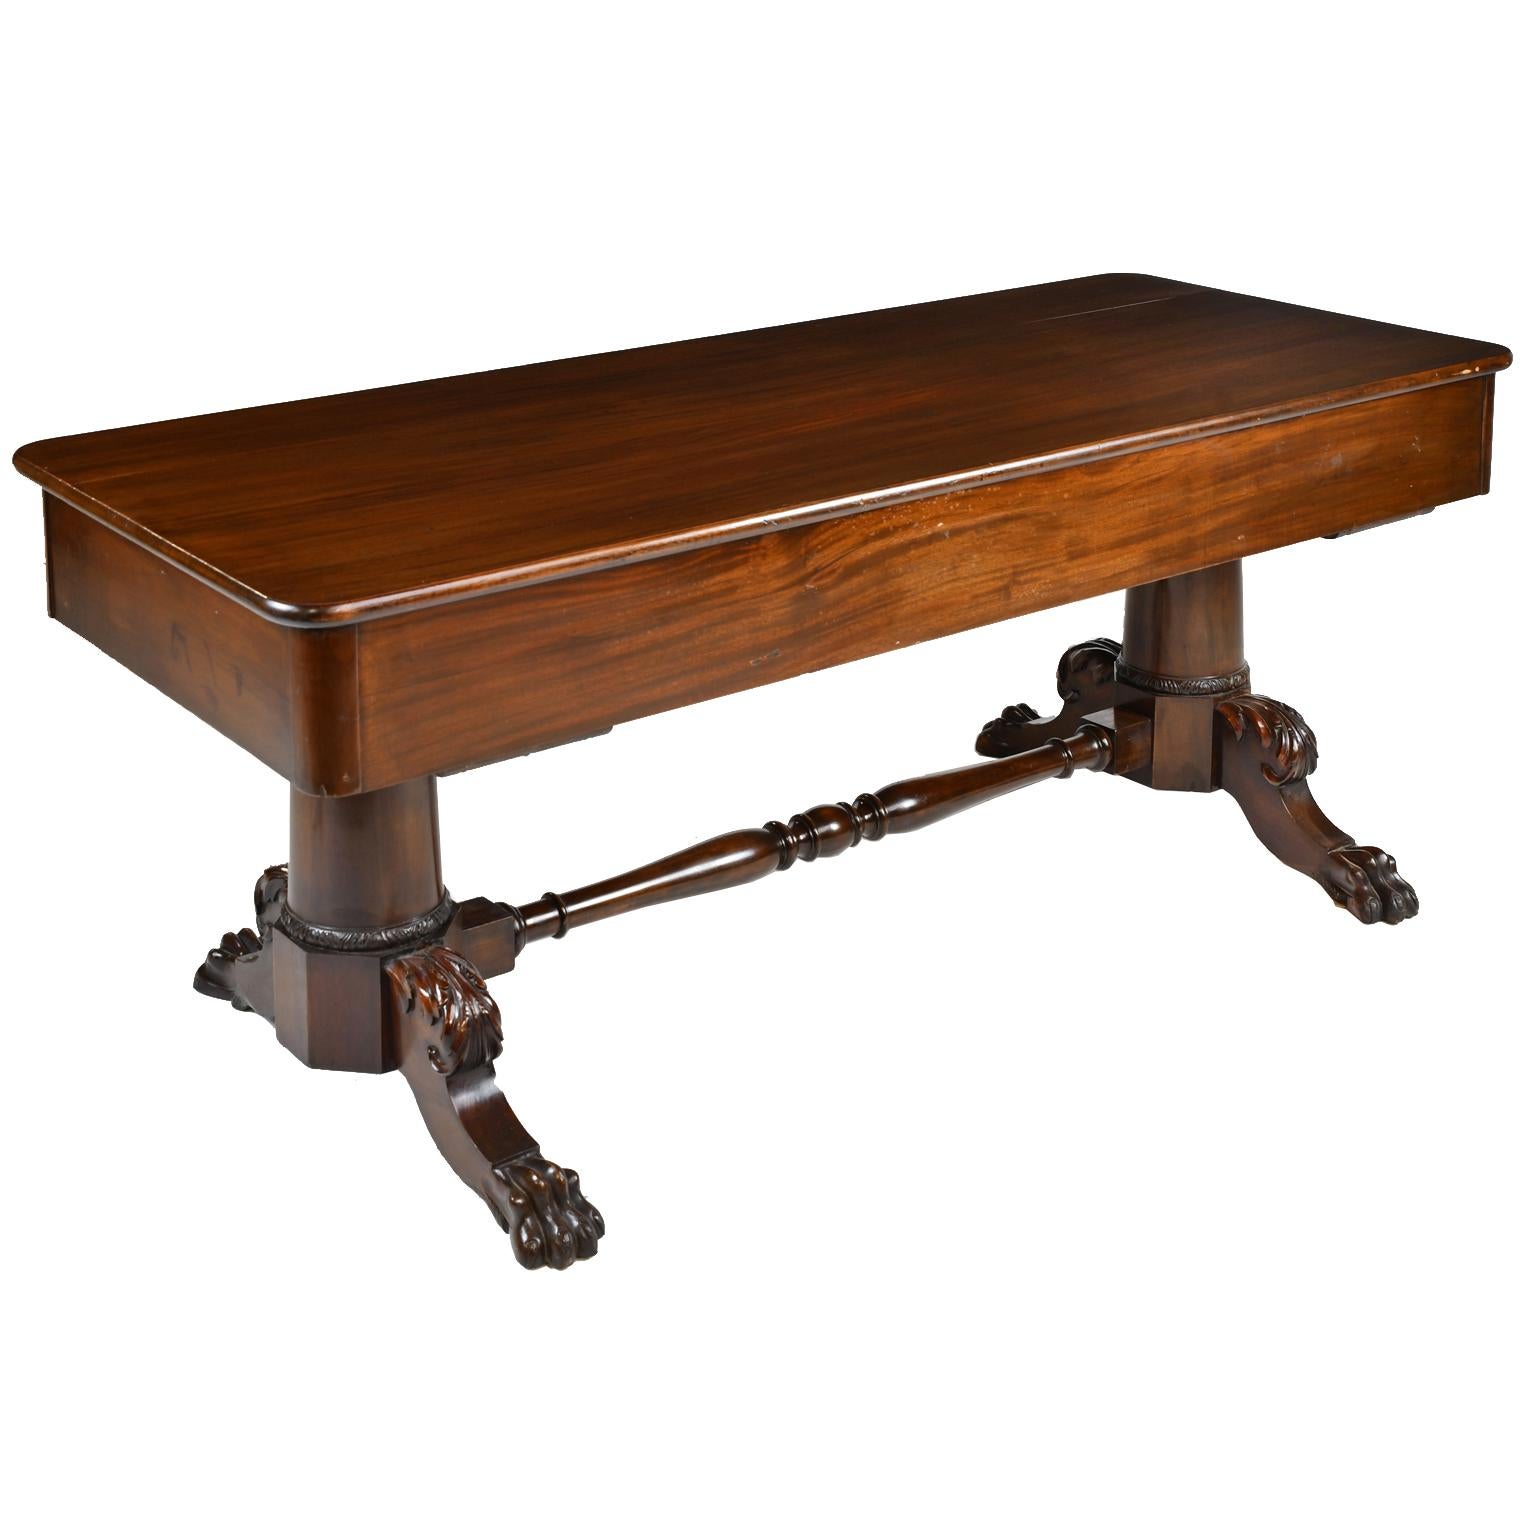 Antique Classical American Philadelphia Desk in Mahogany with Double Pedestal In Good Condition For Sale In Miami, FL